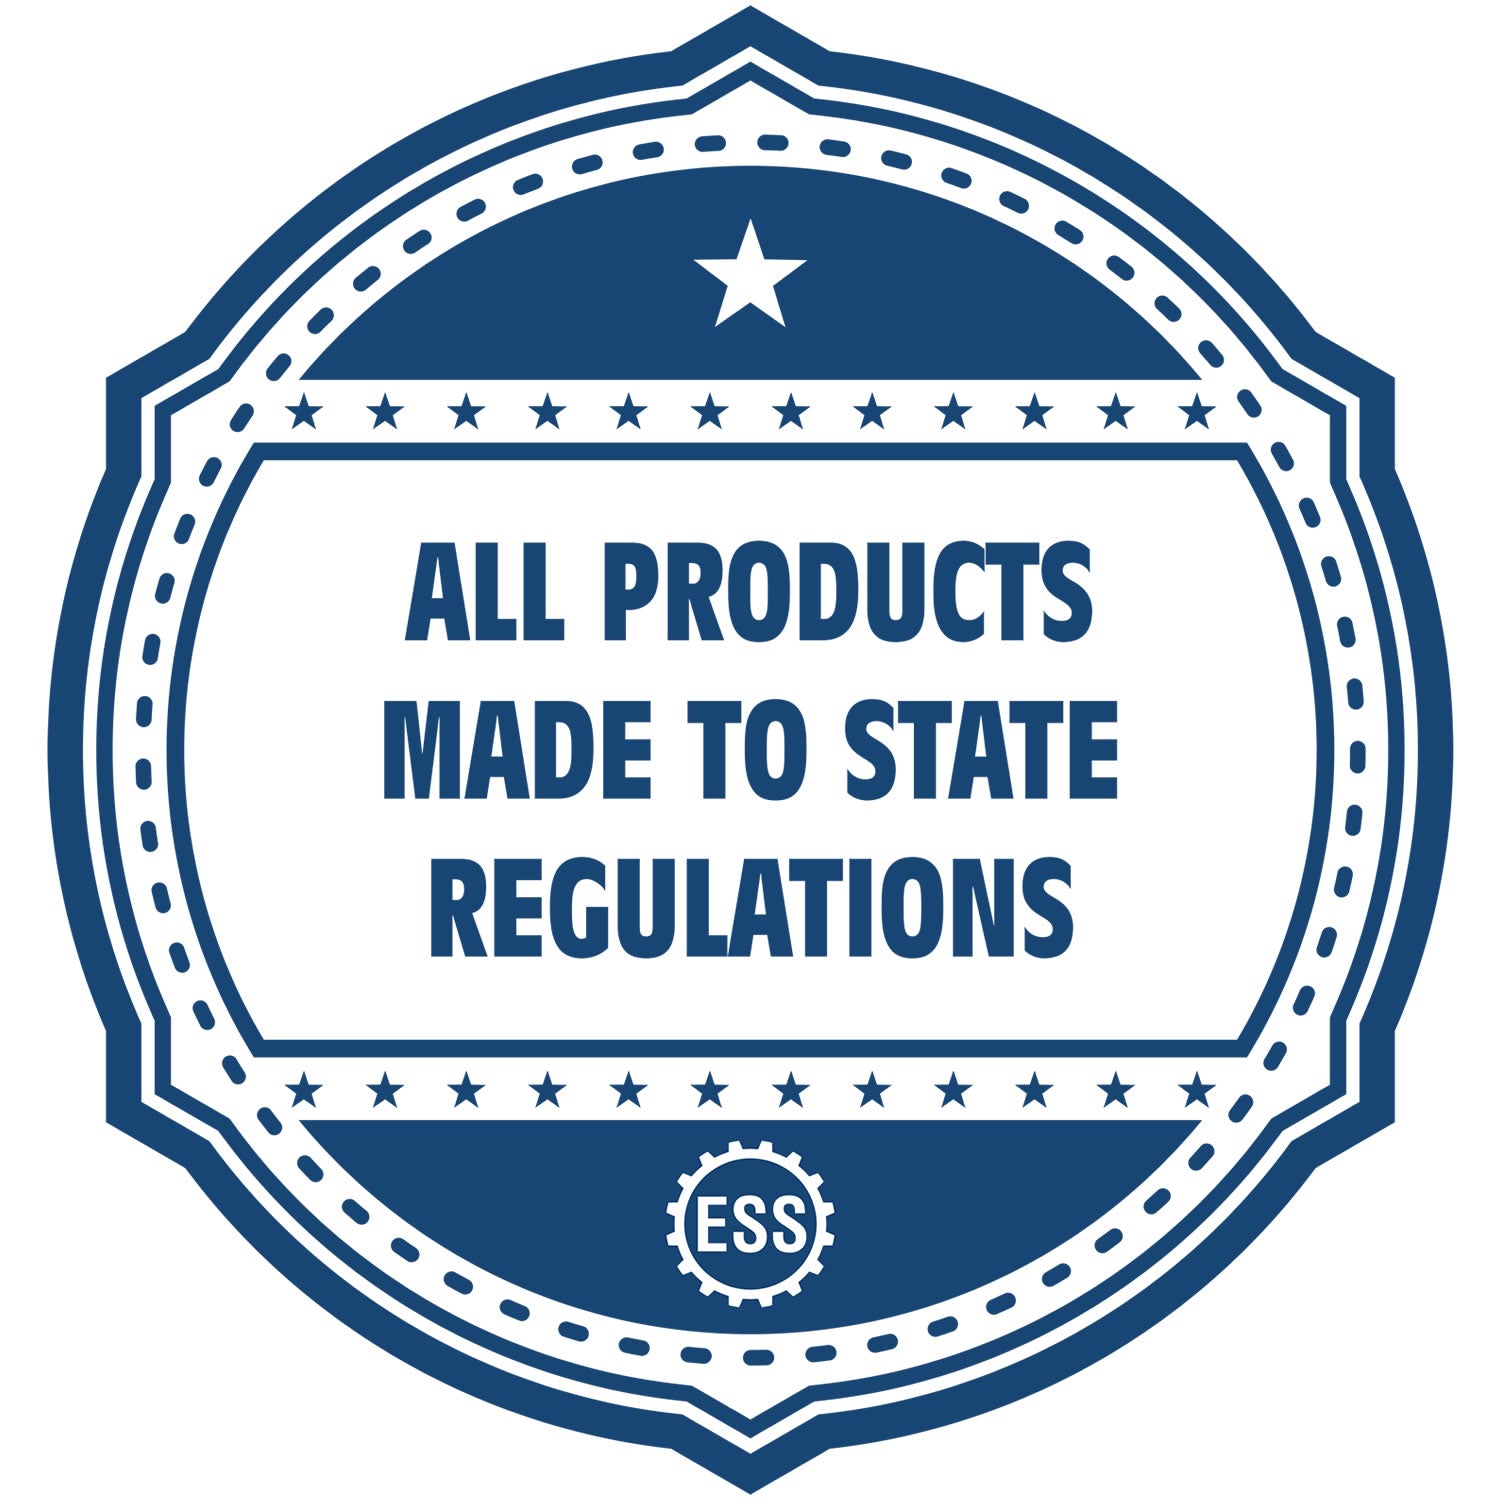 An icon or badge element for the Heavy Duty Kentucky Landscape Architect Cast Iron Embosser showing that this product is made in compliance with state regulations.